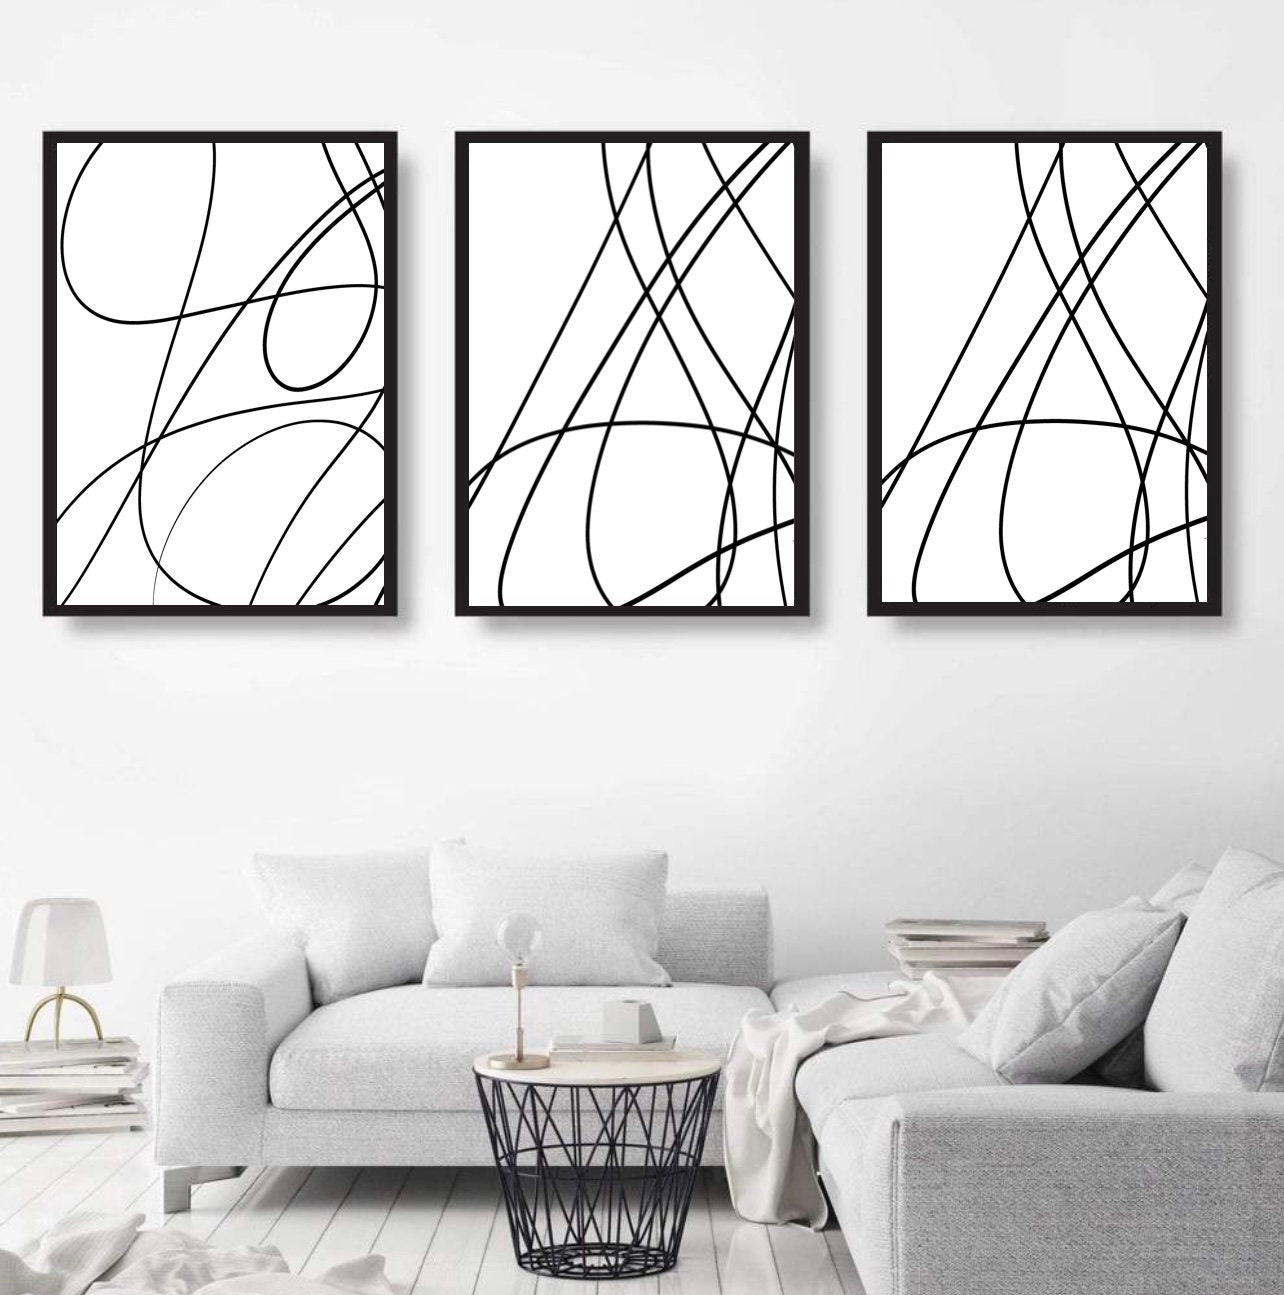 Printable Abstract Art Set of 3 Black and White Single Line - Etsy